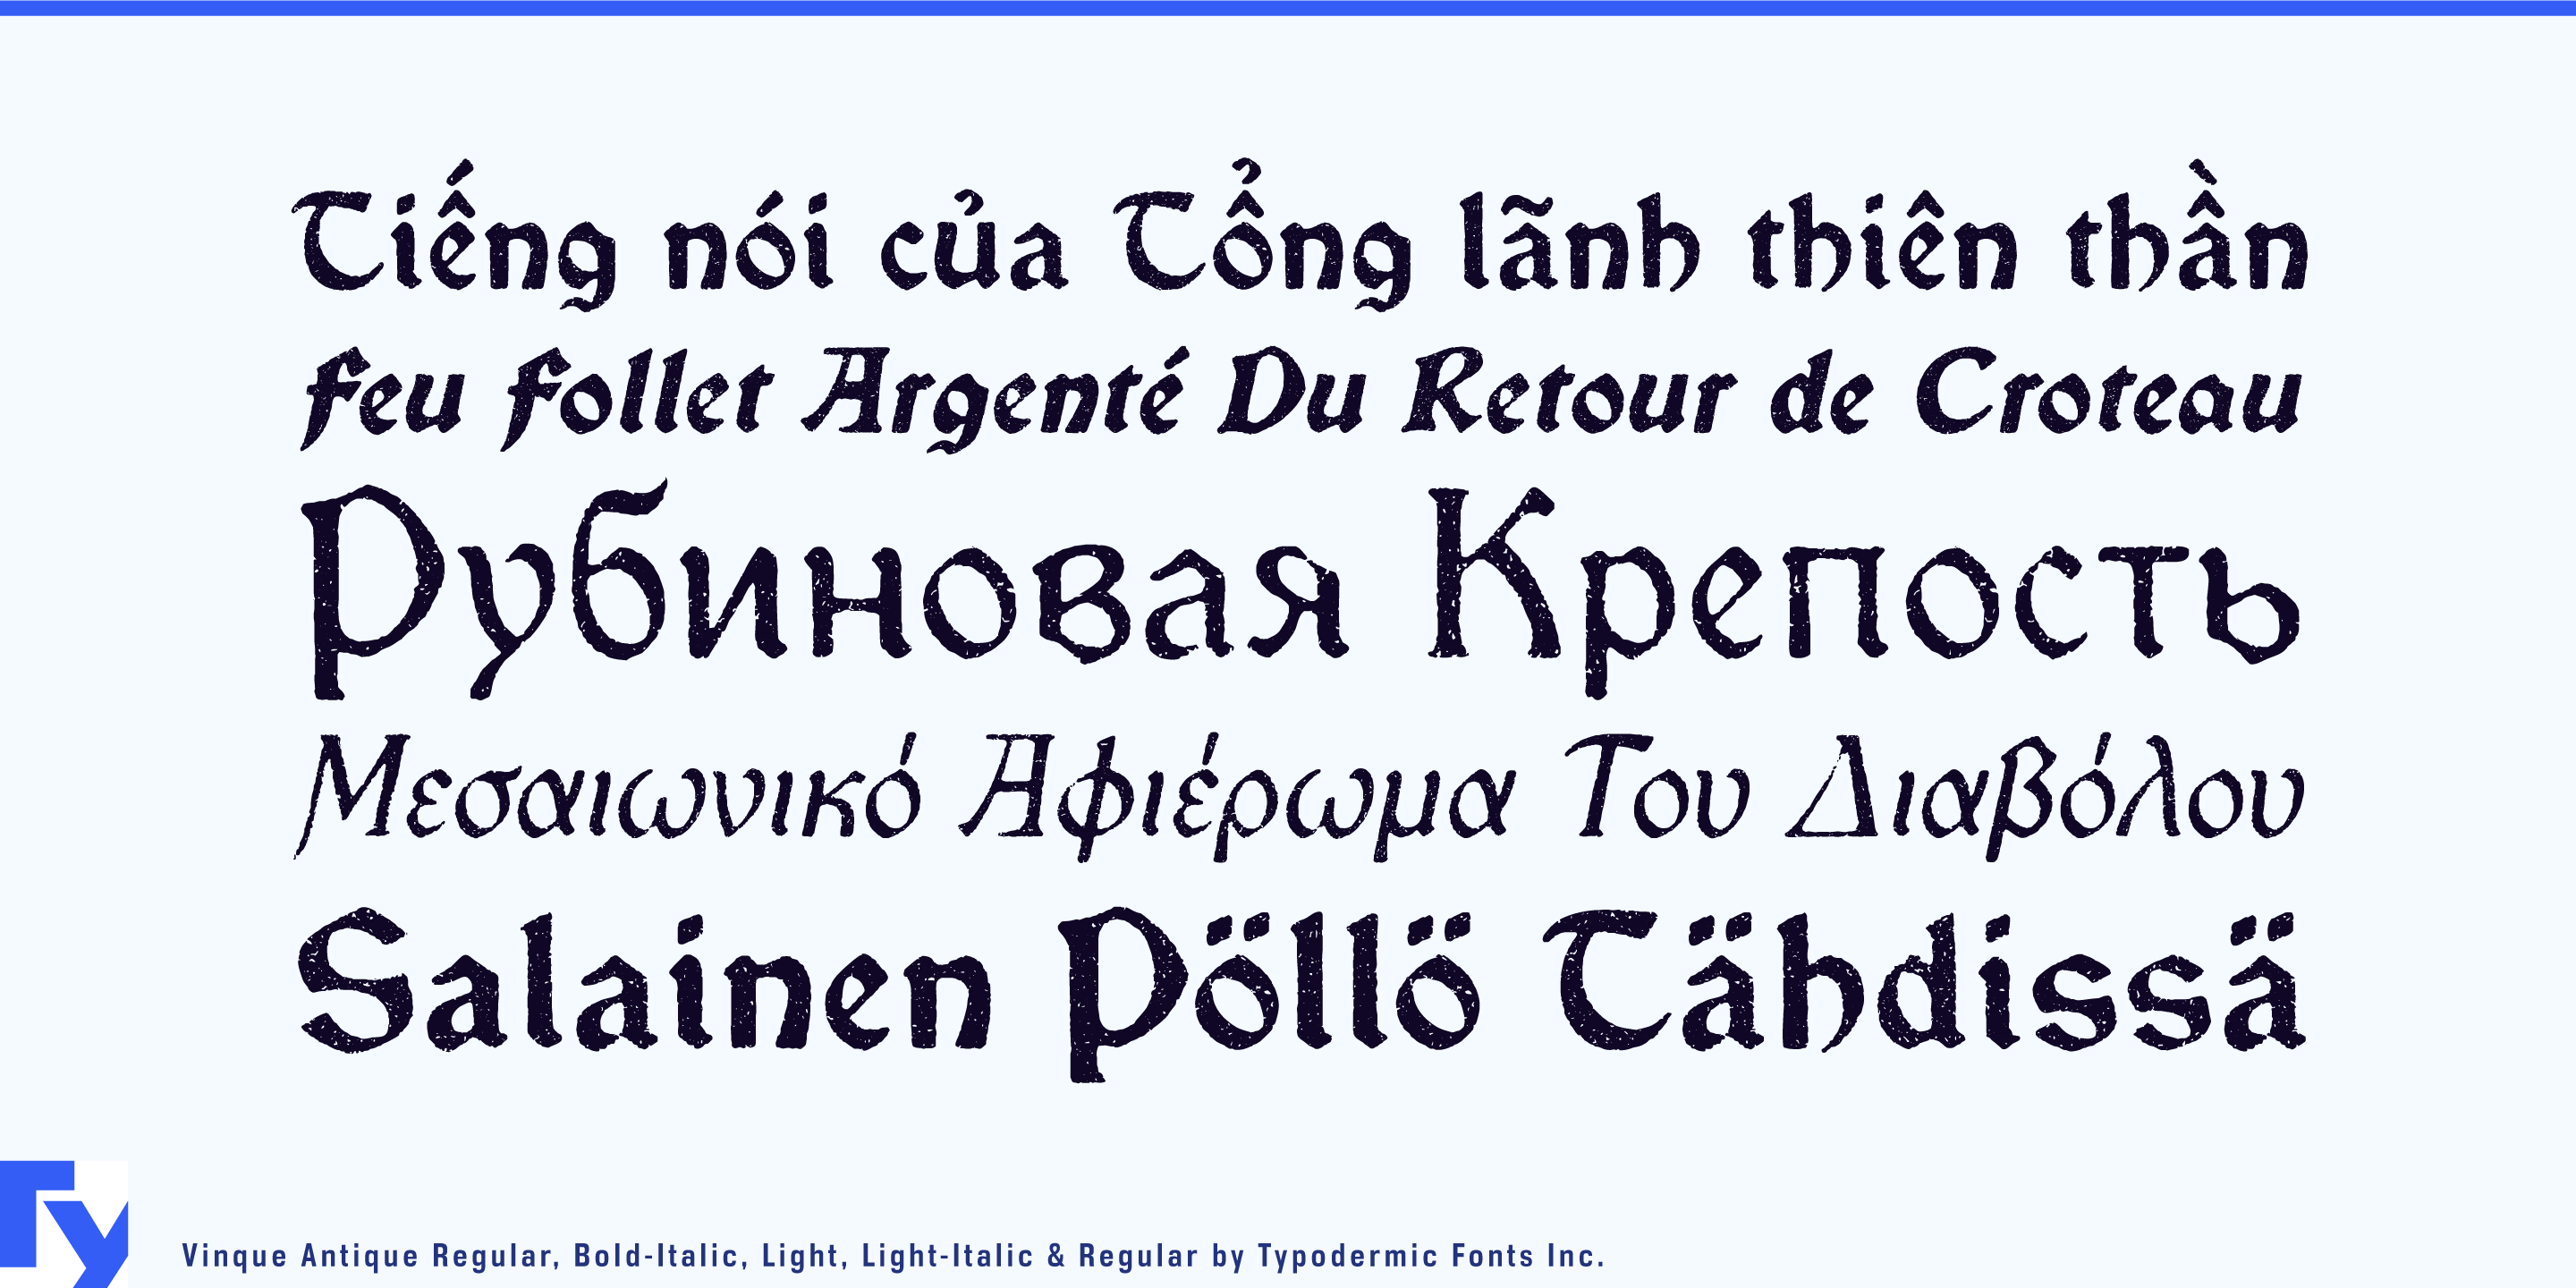 Authentic Handcrafted Art: Vinque Antique Typeface Echoes Tradition